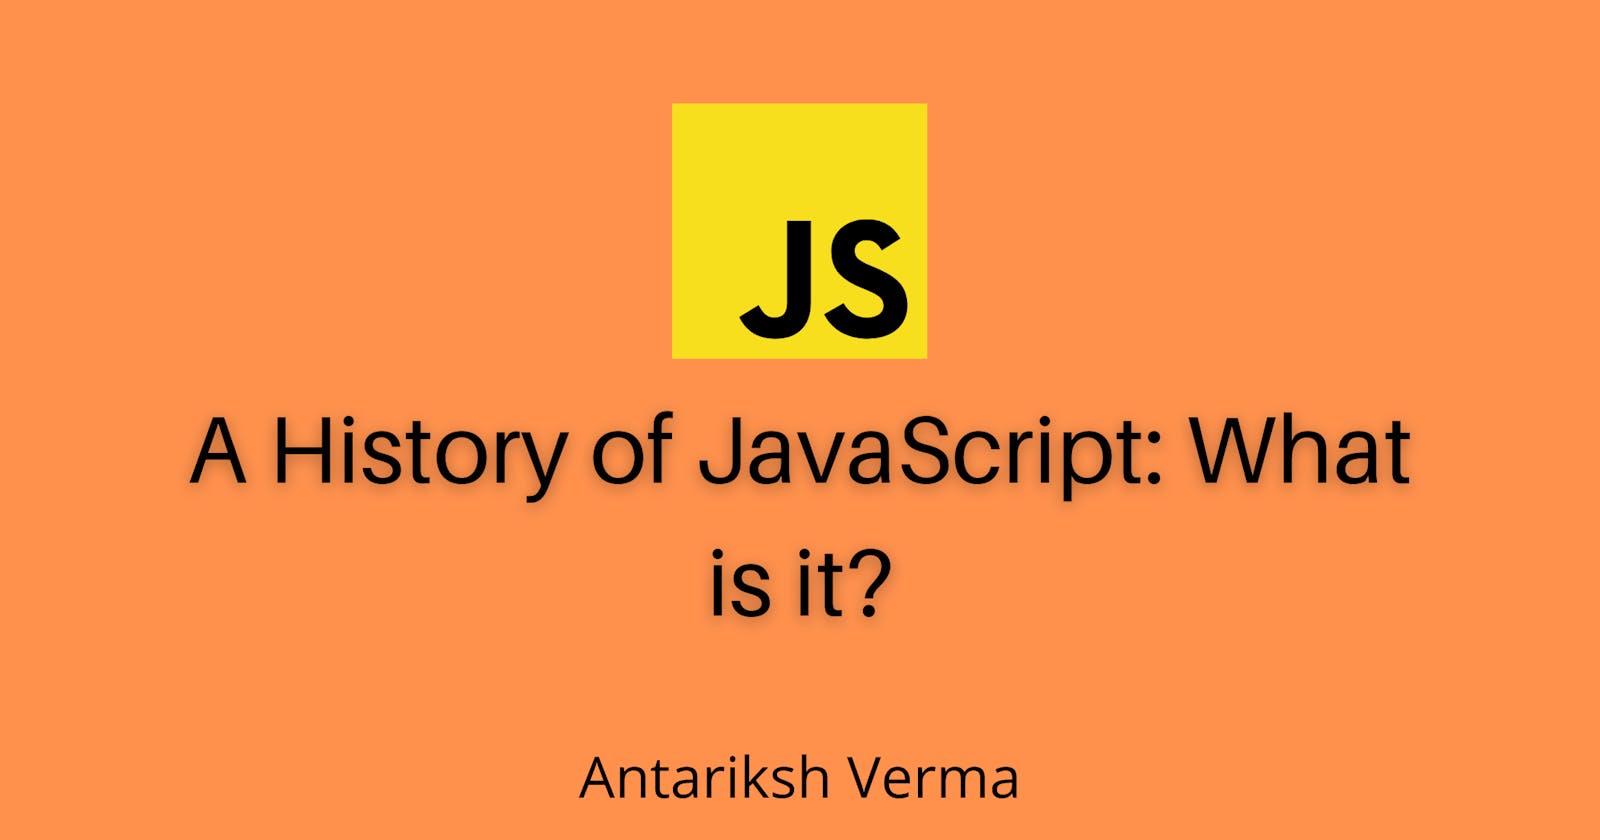 A History of JavaScript: What is it?